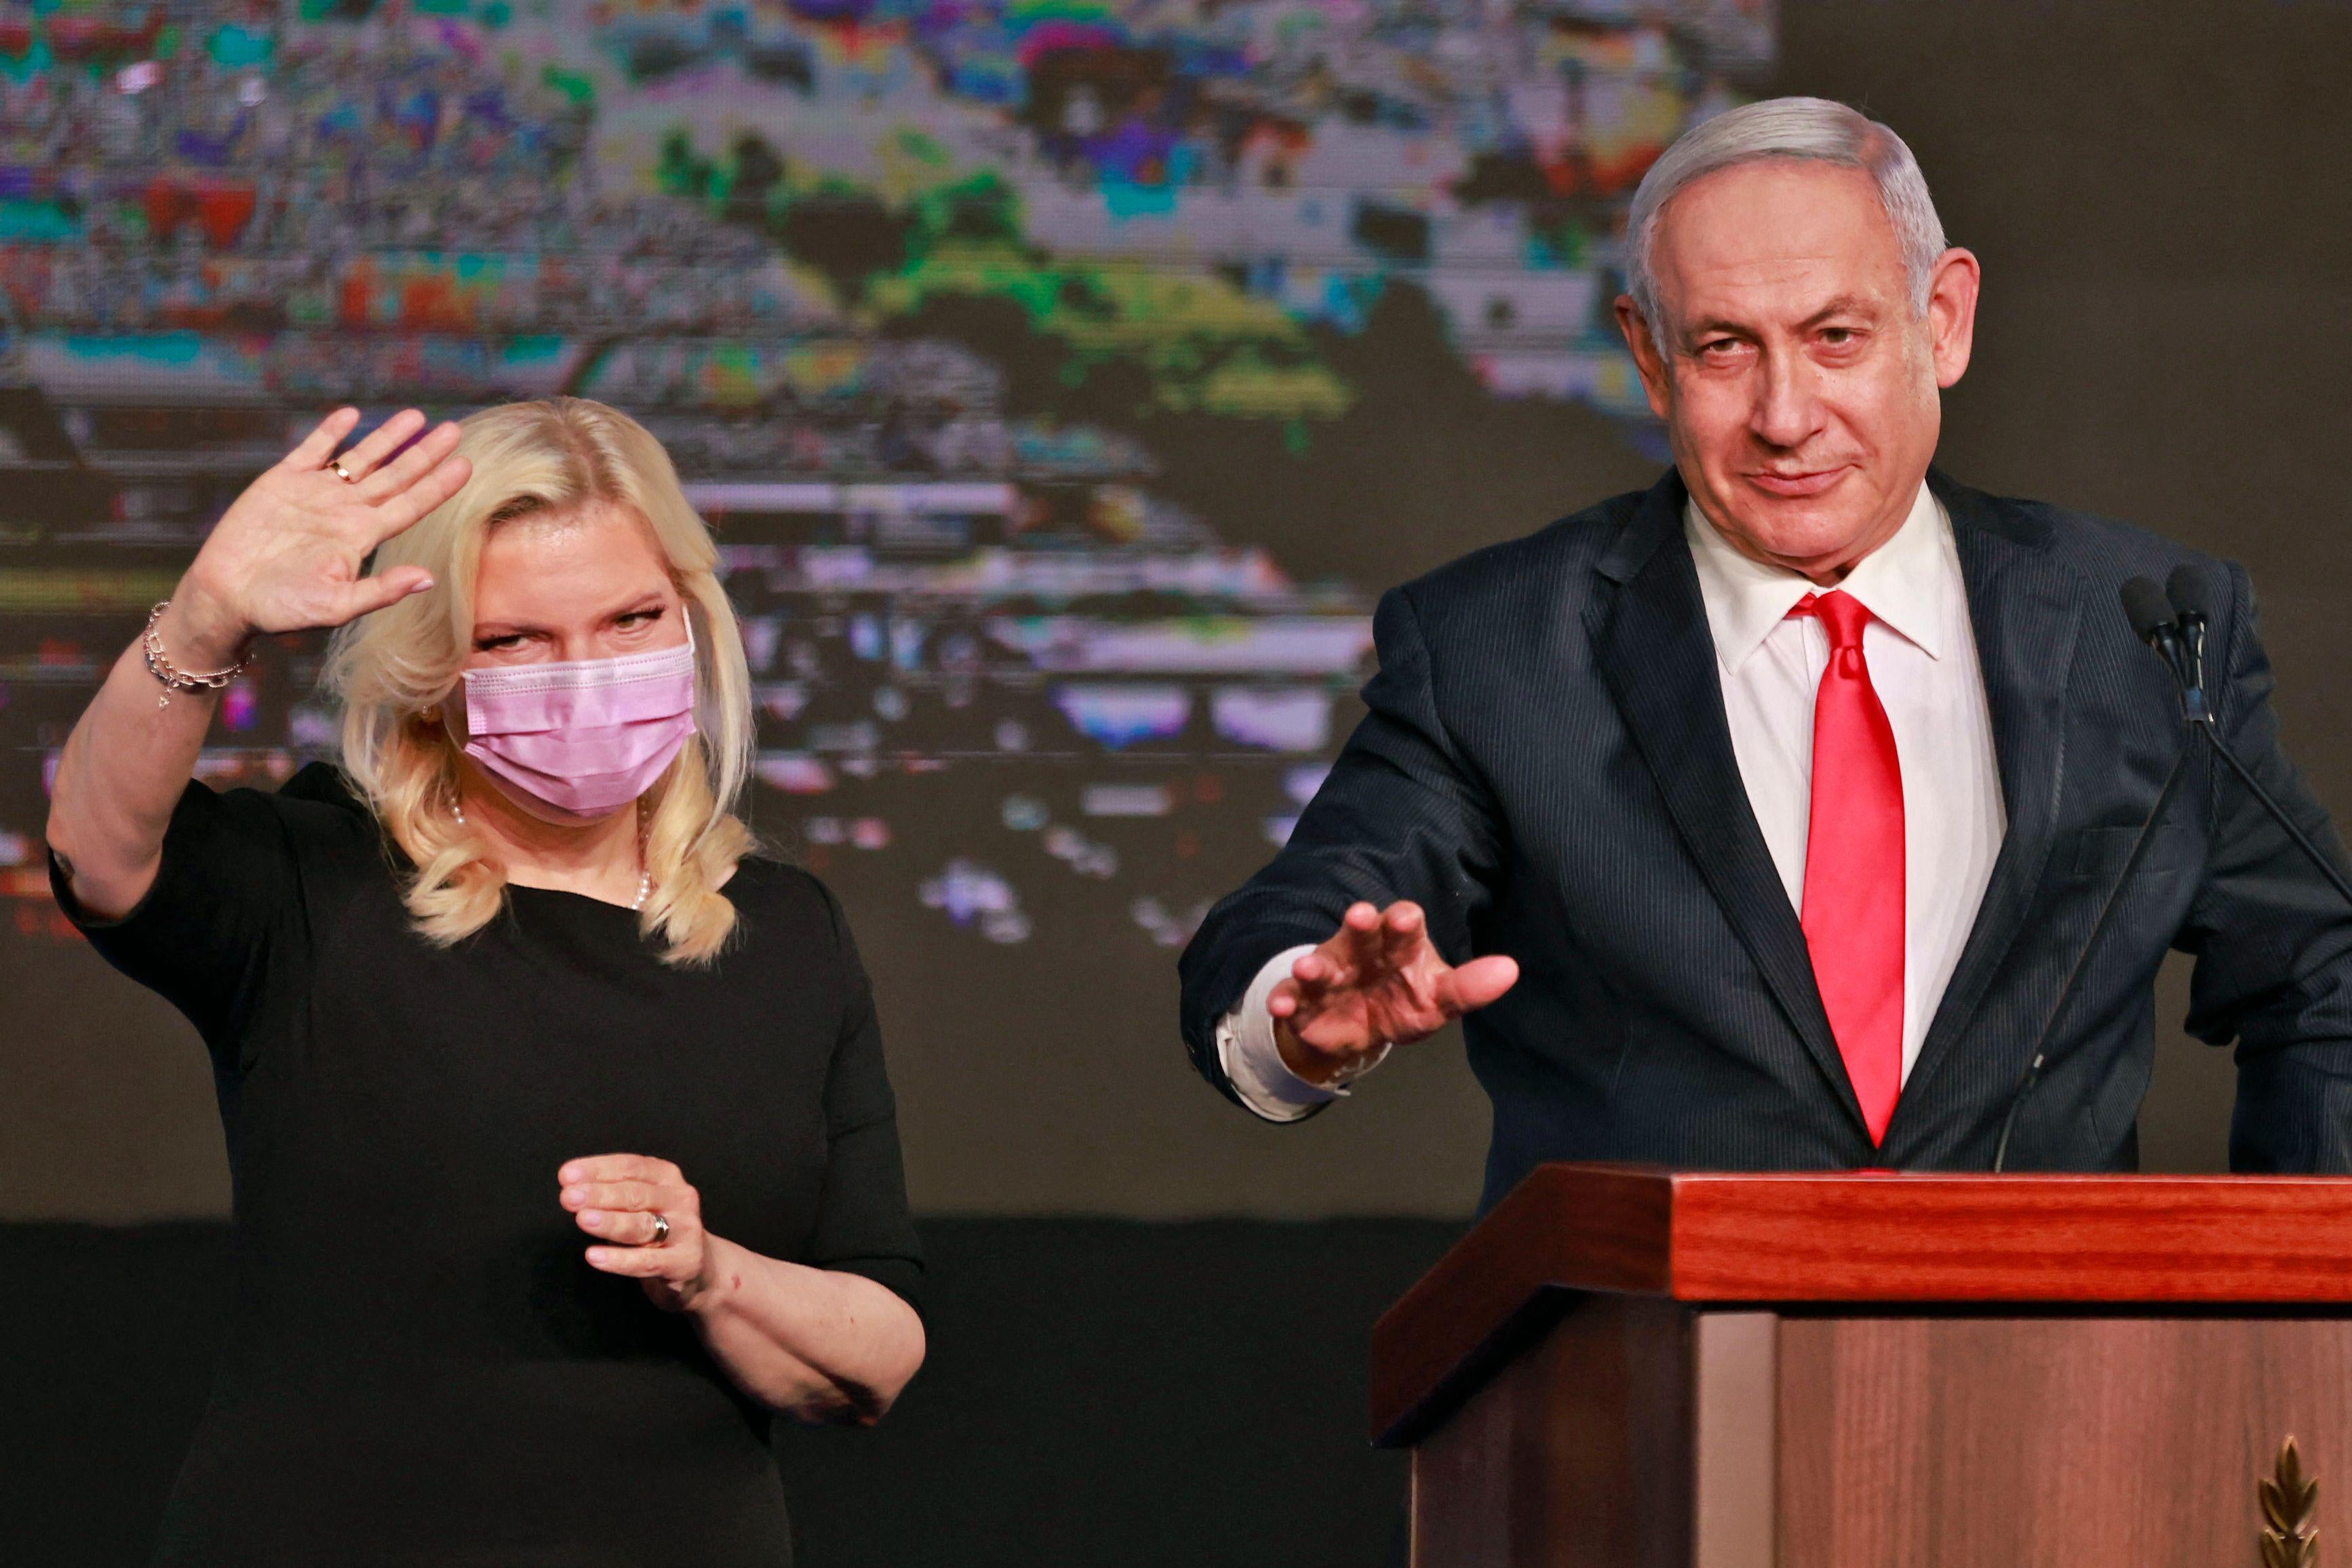 Sara waves to the crowd as she stands next to Benjamin Netanyahu, who is at a podium